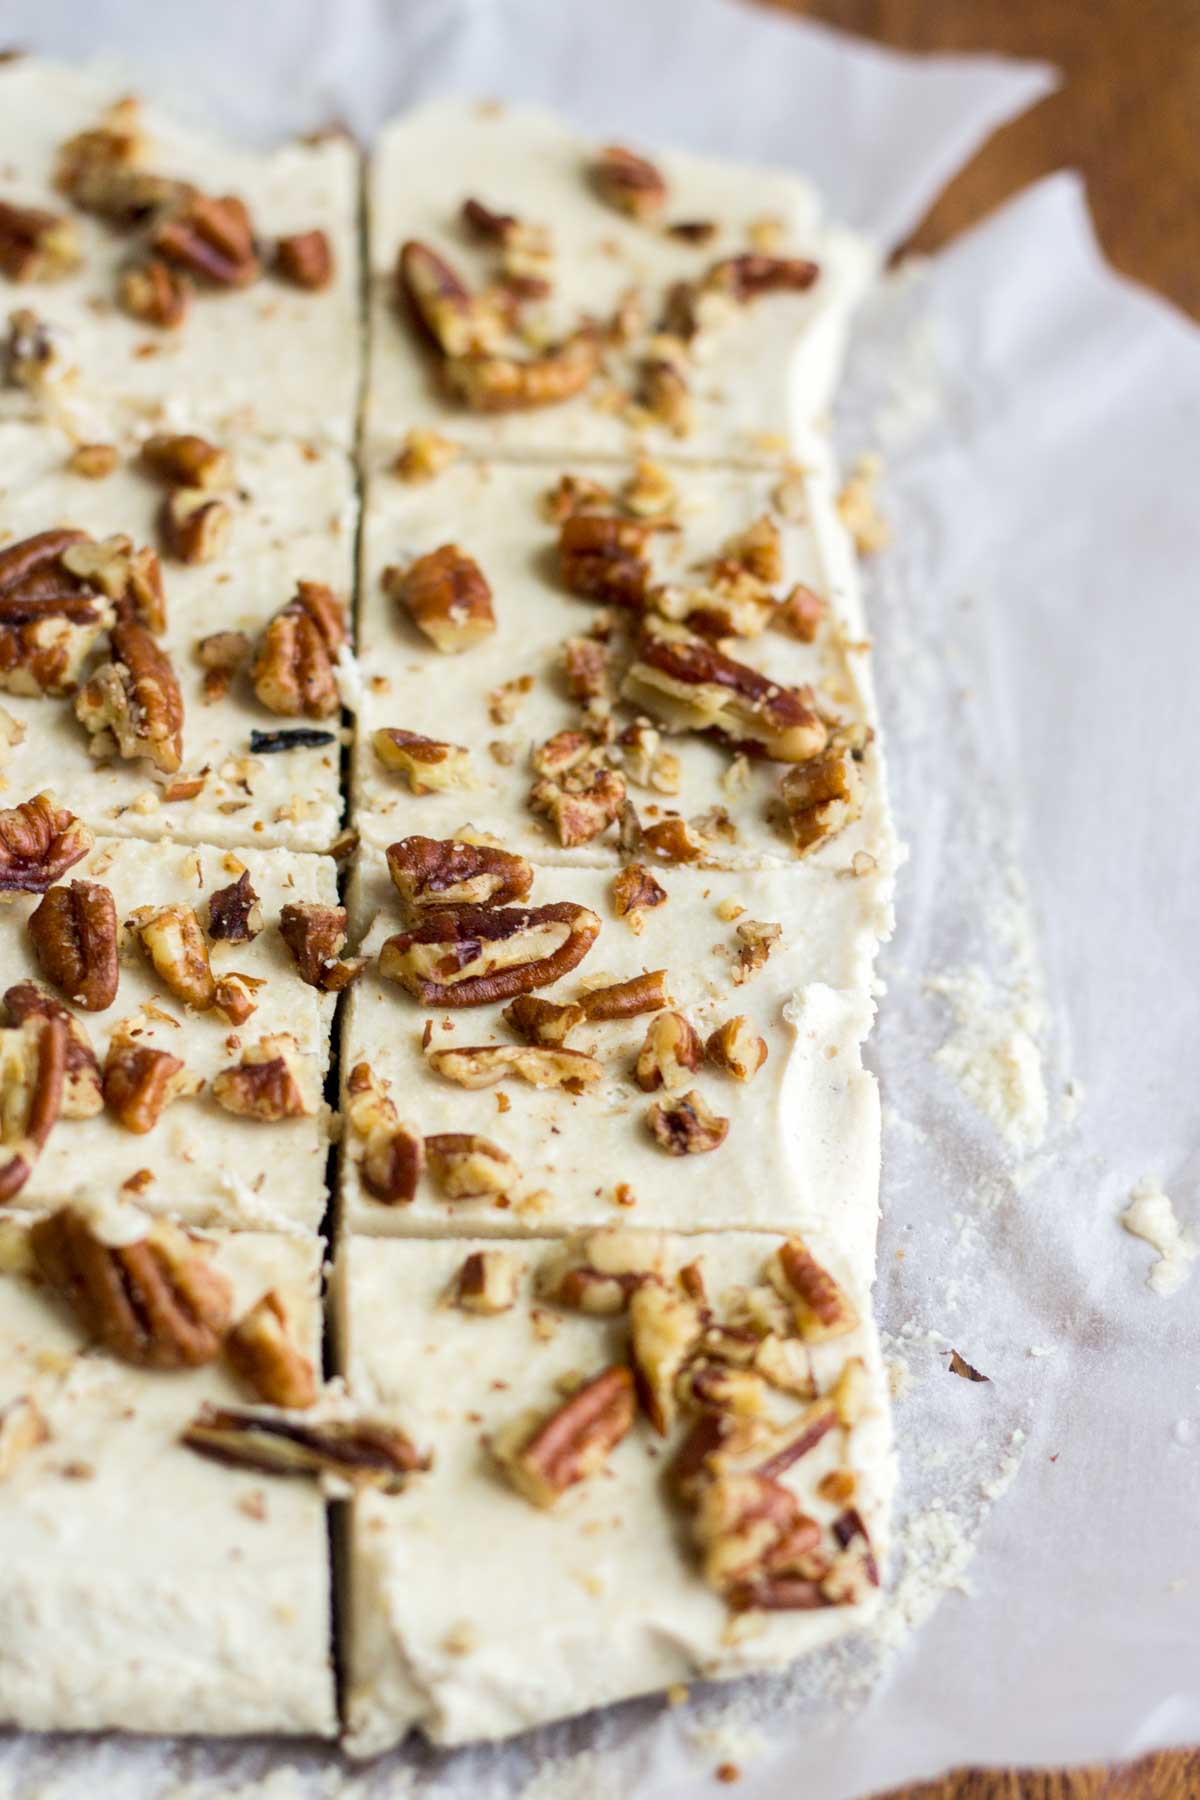 Smooth and creamy, these turtle vegan cheesecake bars are an easy and no bake healthy dessert. The crust is made with pecans and dates and the silky vegan cheesecake is topped with paleo caramel and pecans. You won't believe how yummy an easy it is to make!